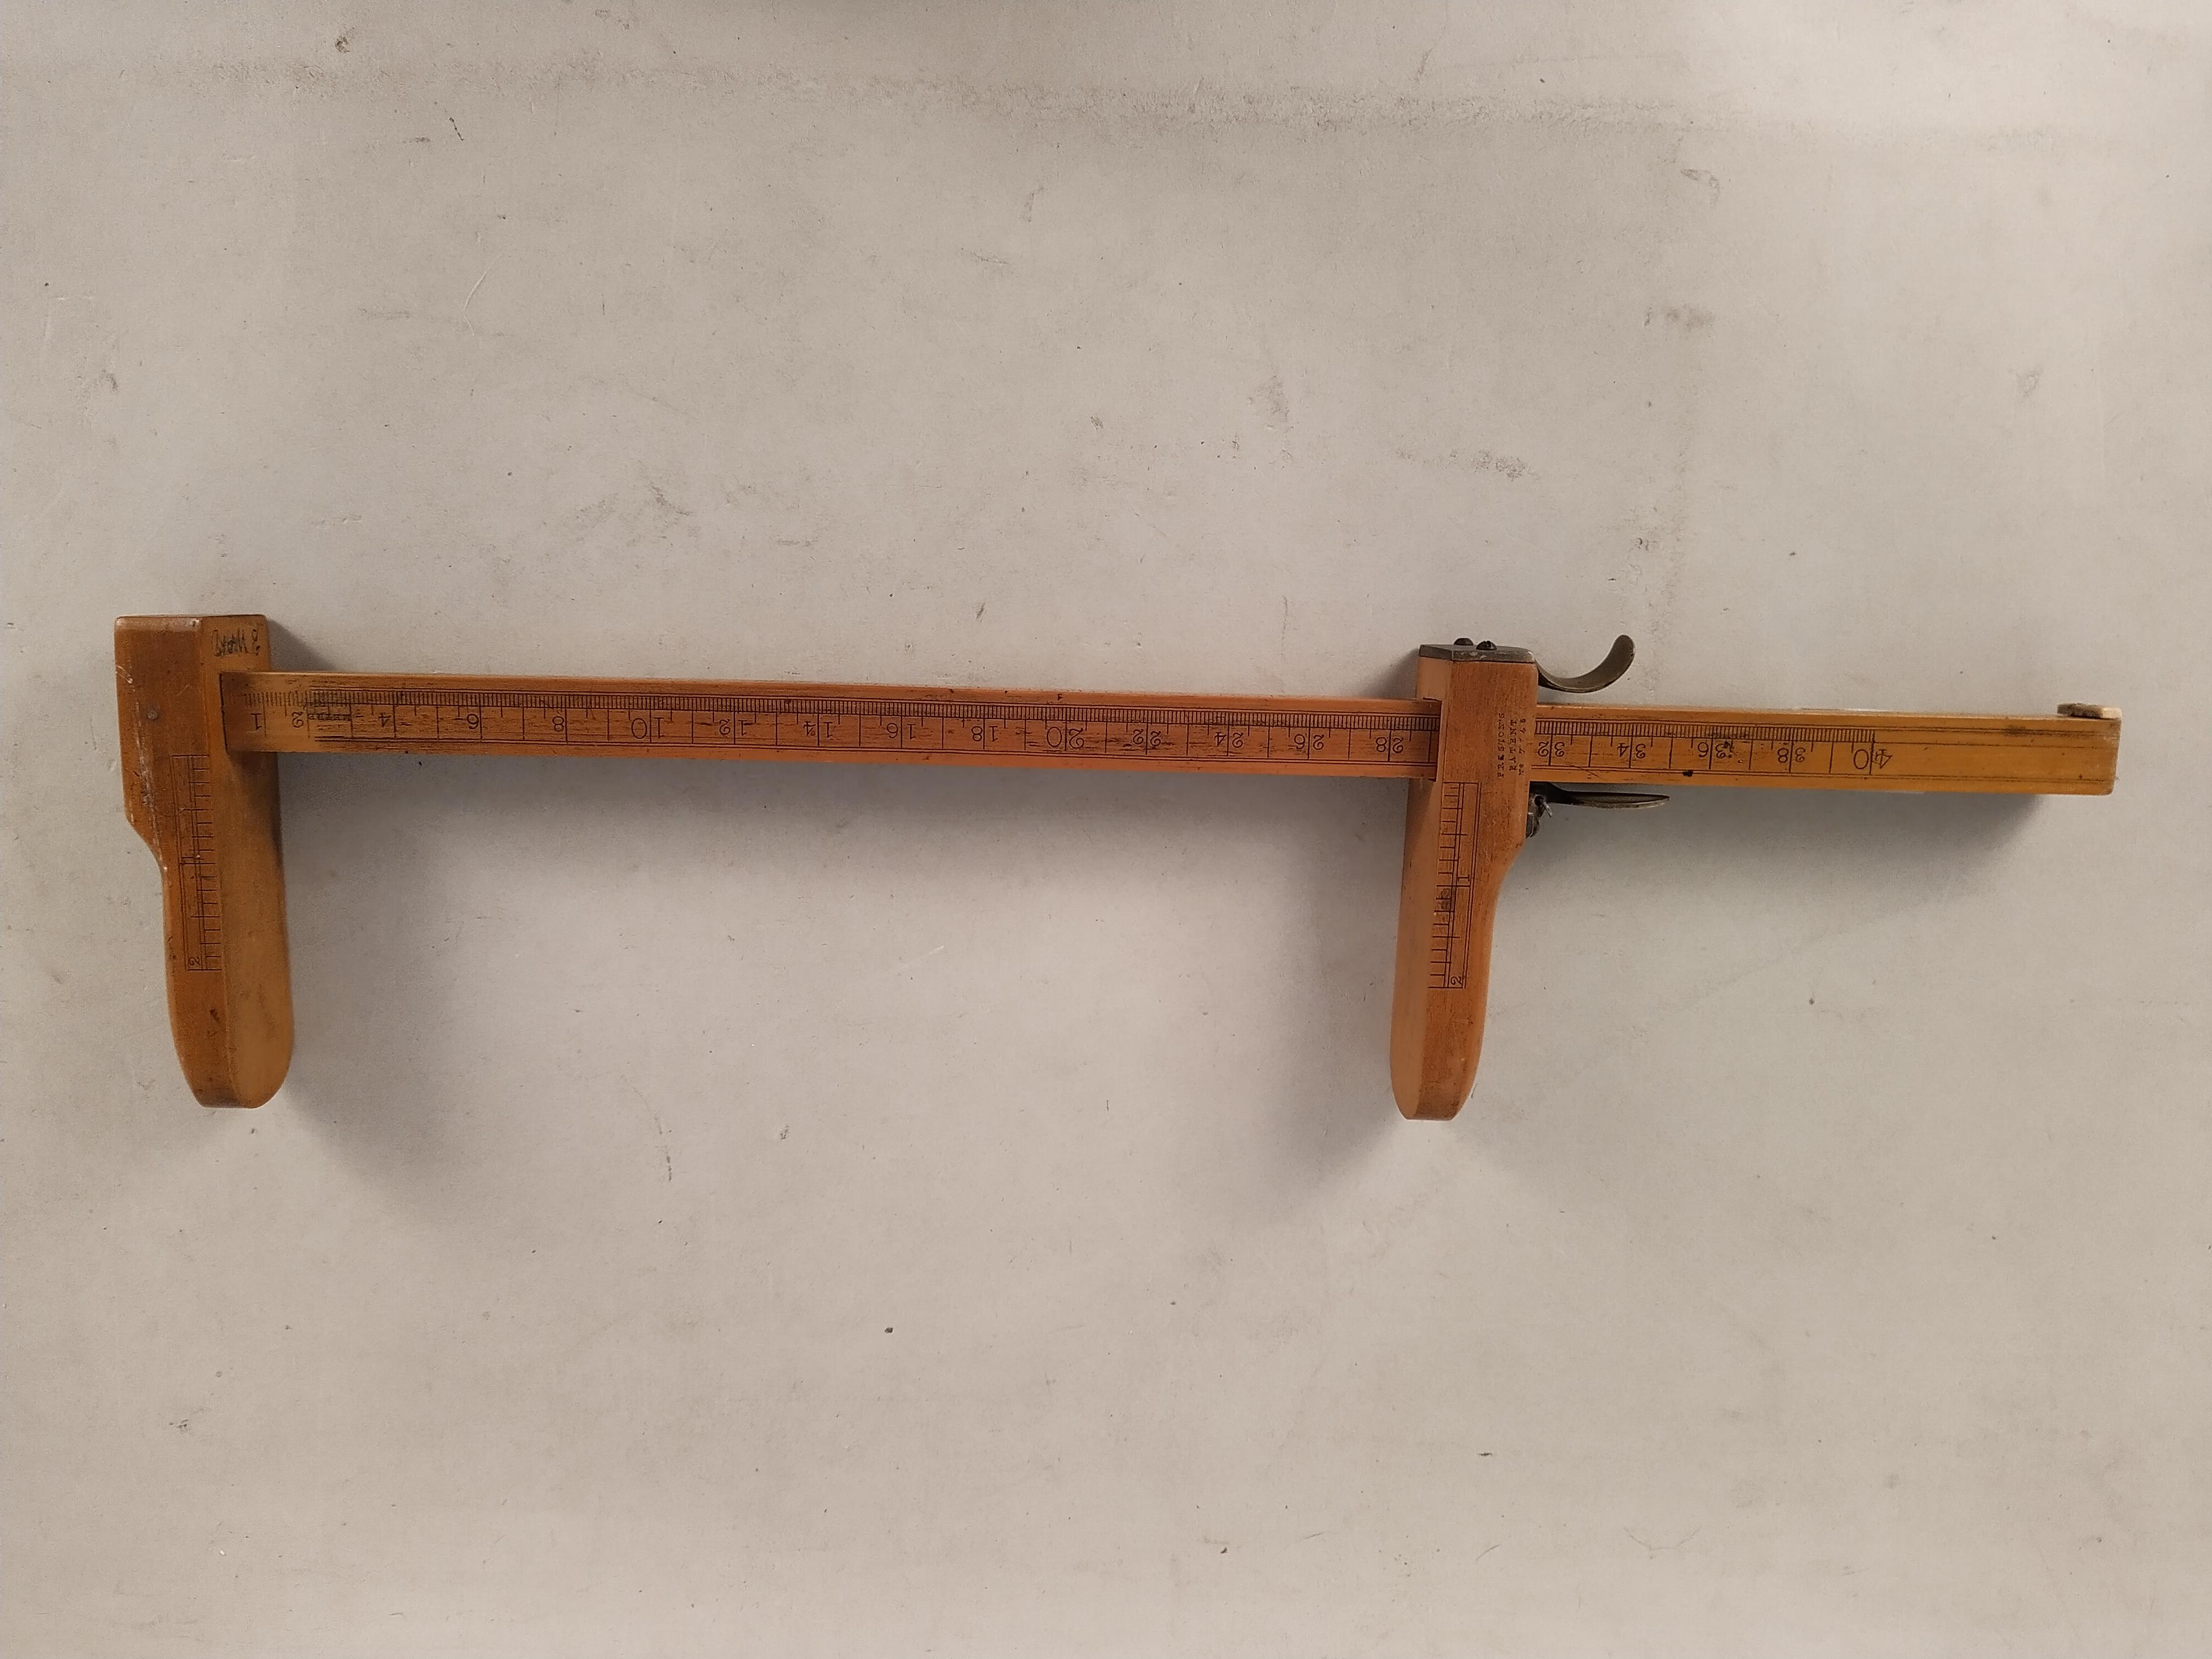 A vintage Prestons patent shoe size measuring instrument made from wood with various measuring - Image 2 of 3